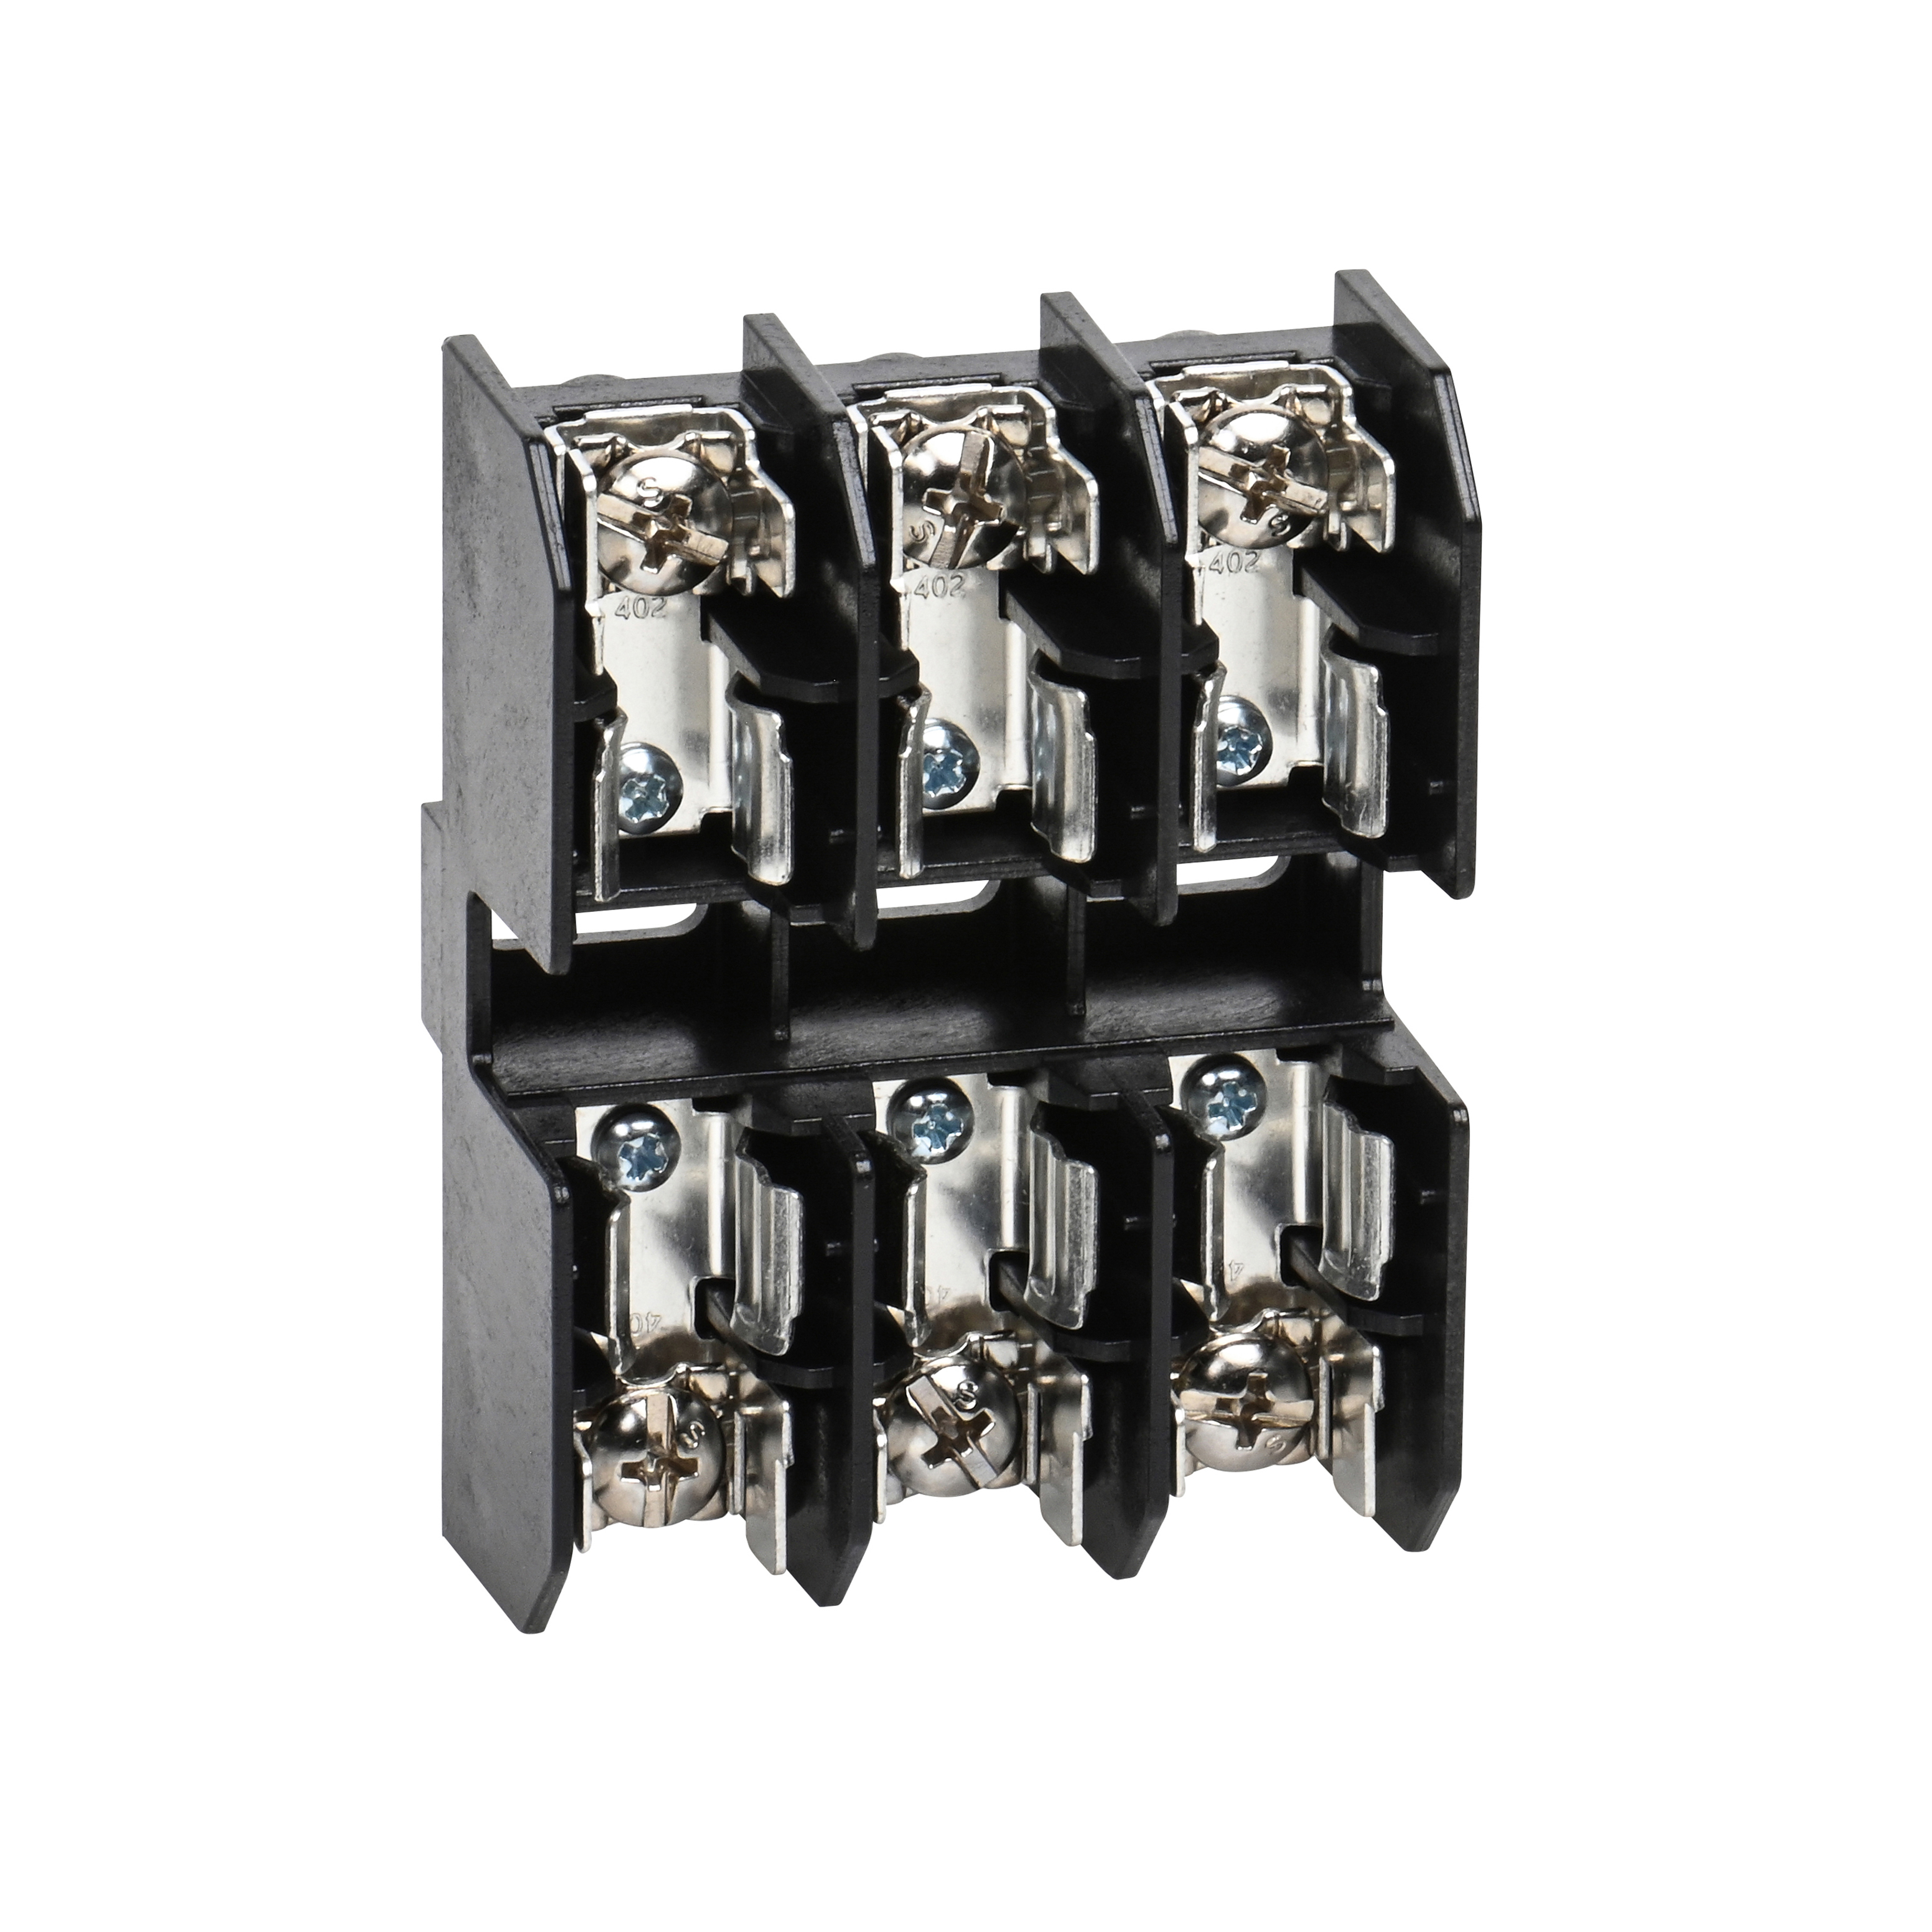 Terminal block, Linergy, fuse holder, Class M, 30A, 600V, 3 pole